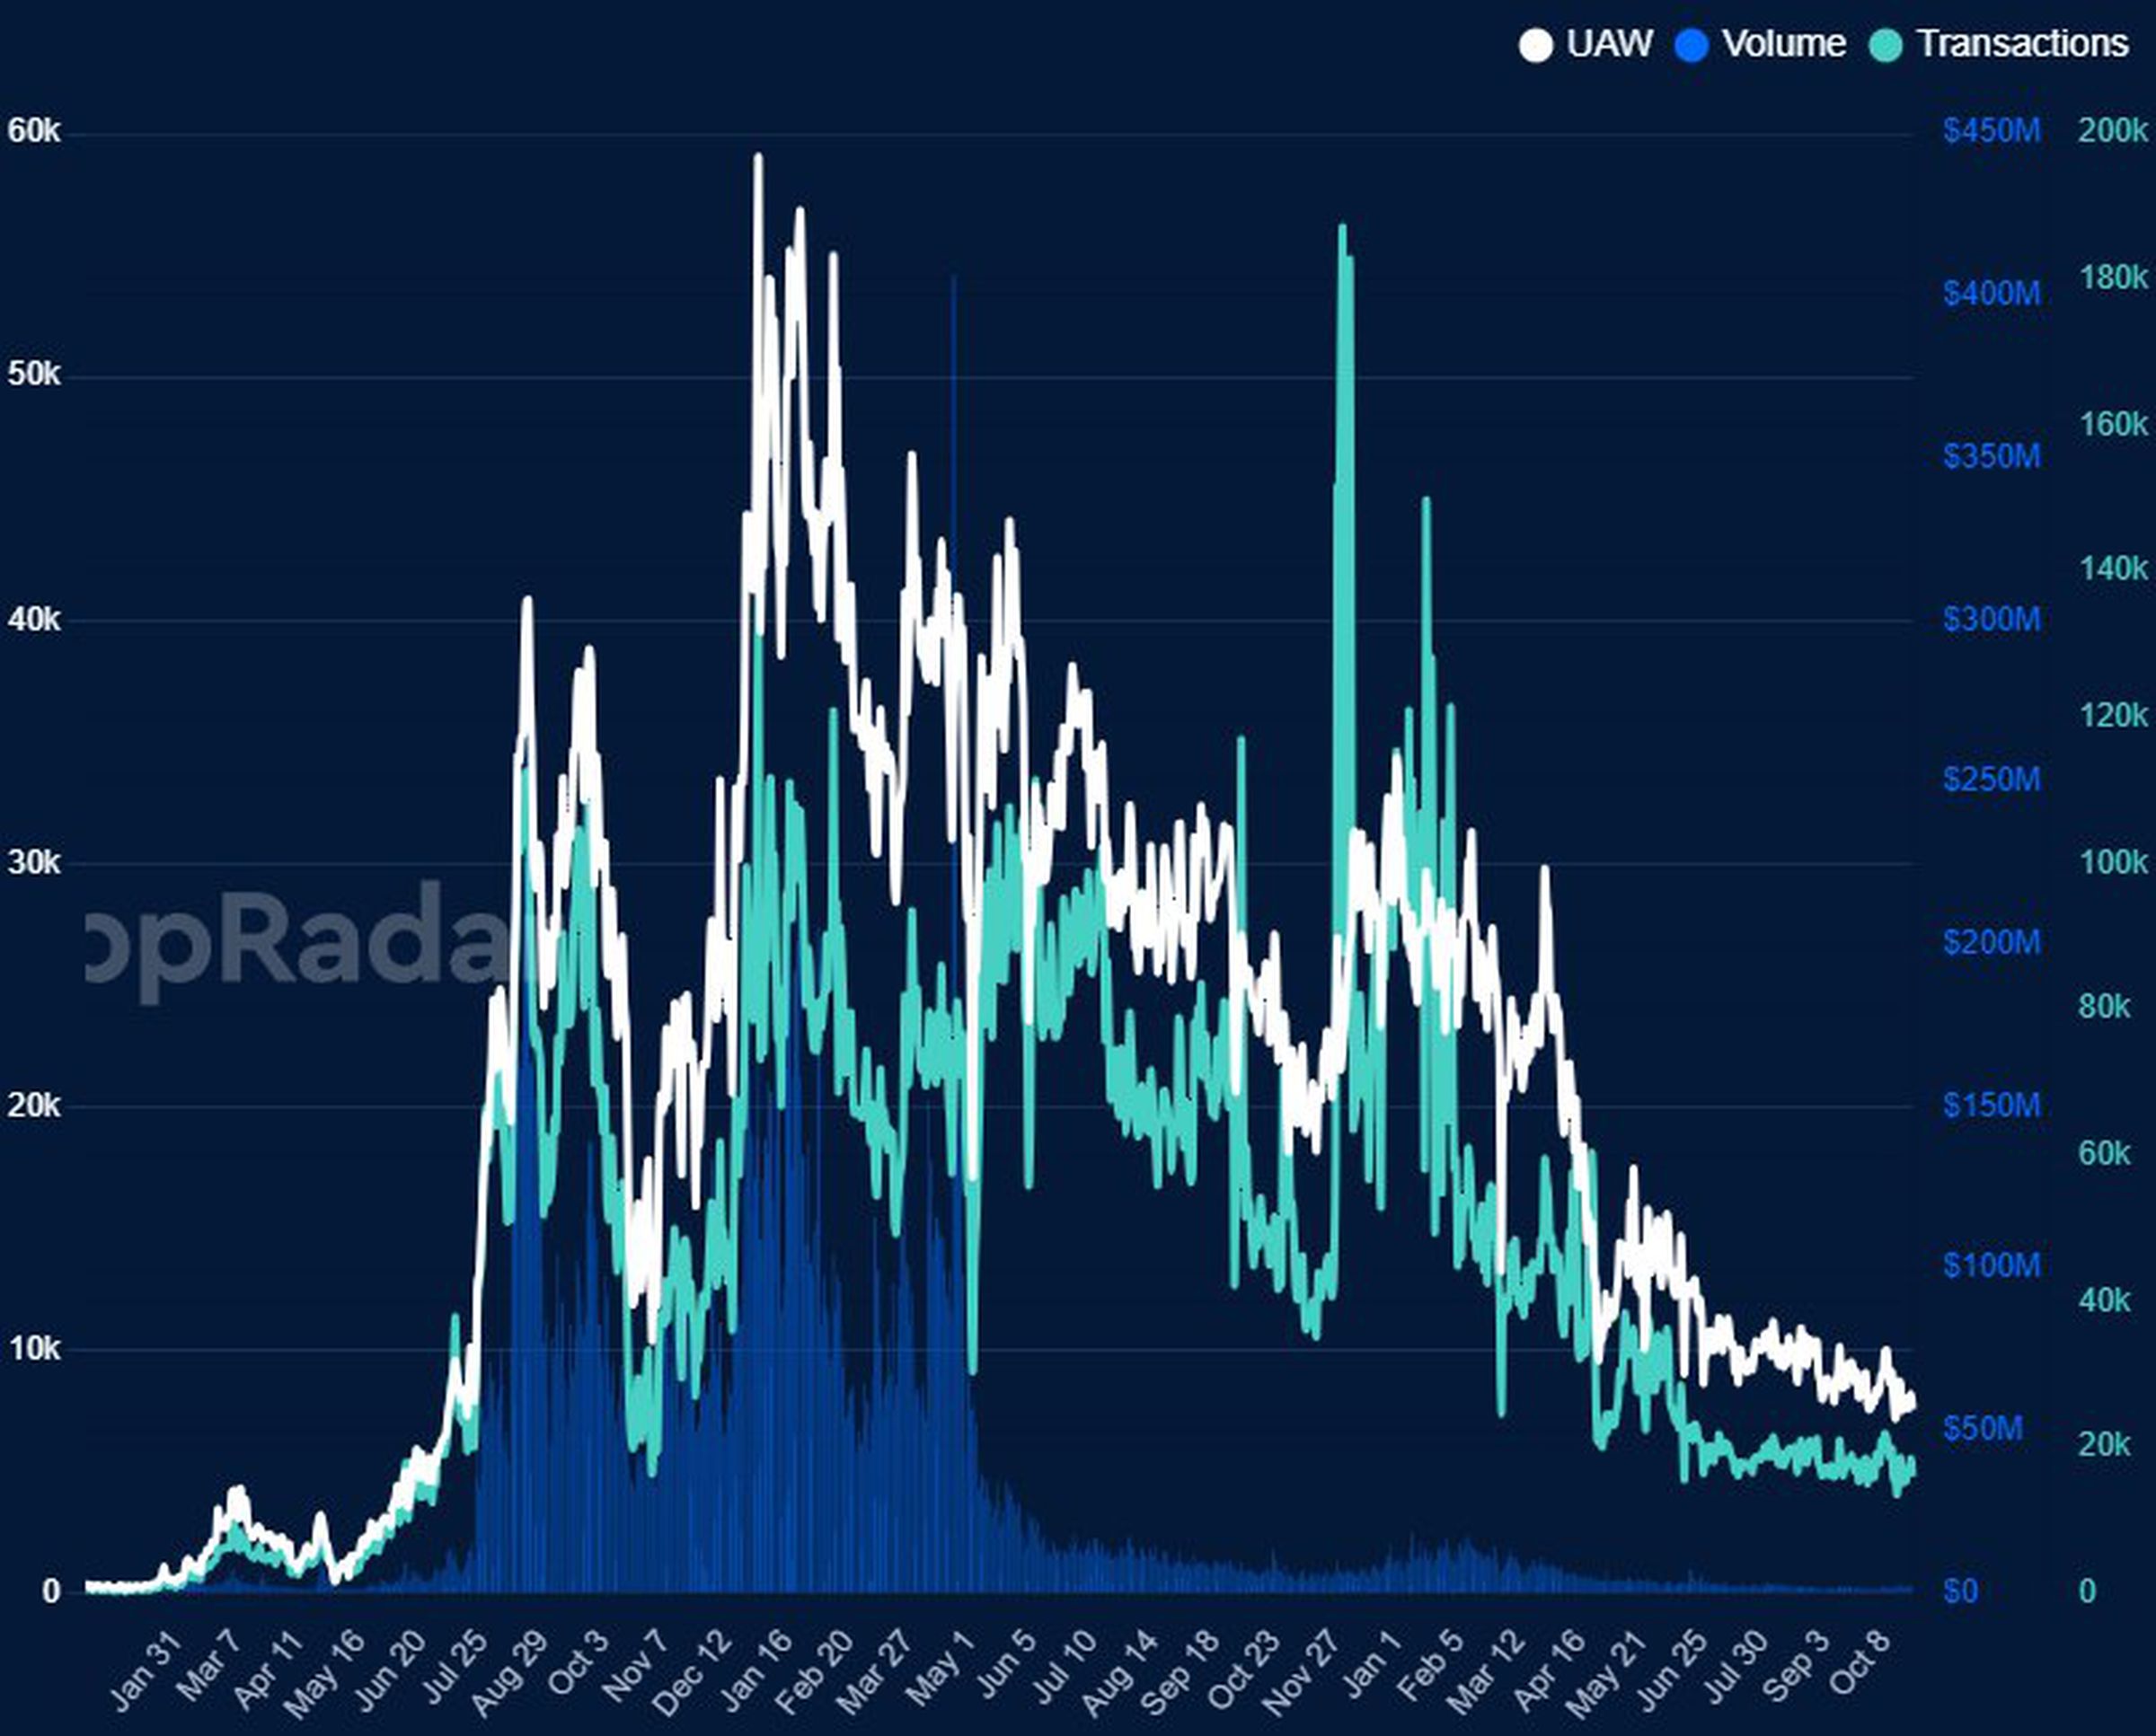 A line graph from the site DappRadar showing how the active wallets, volume, and transactions on OpenSea peaked at the end of 2021 and have shrunk to almost nothing now in comparison.